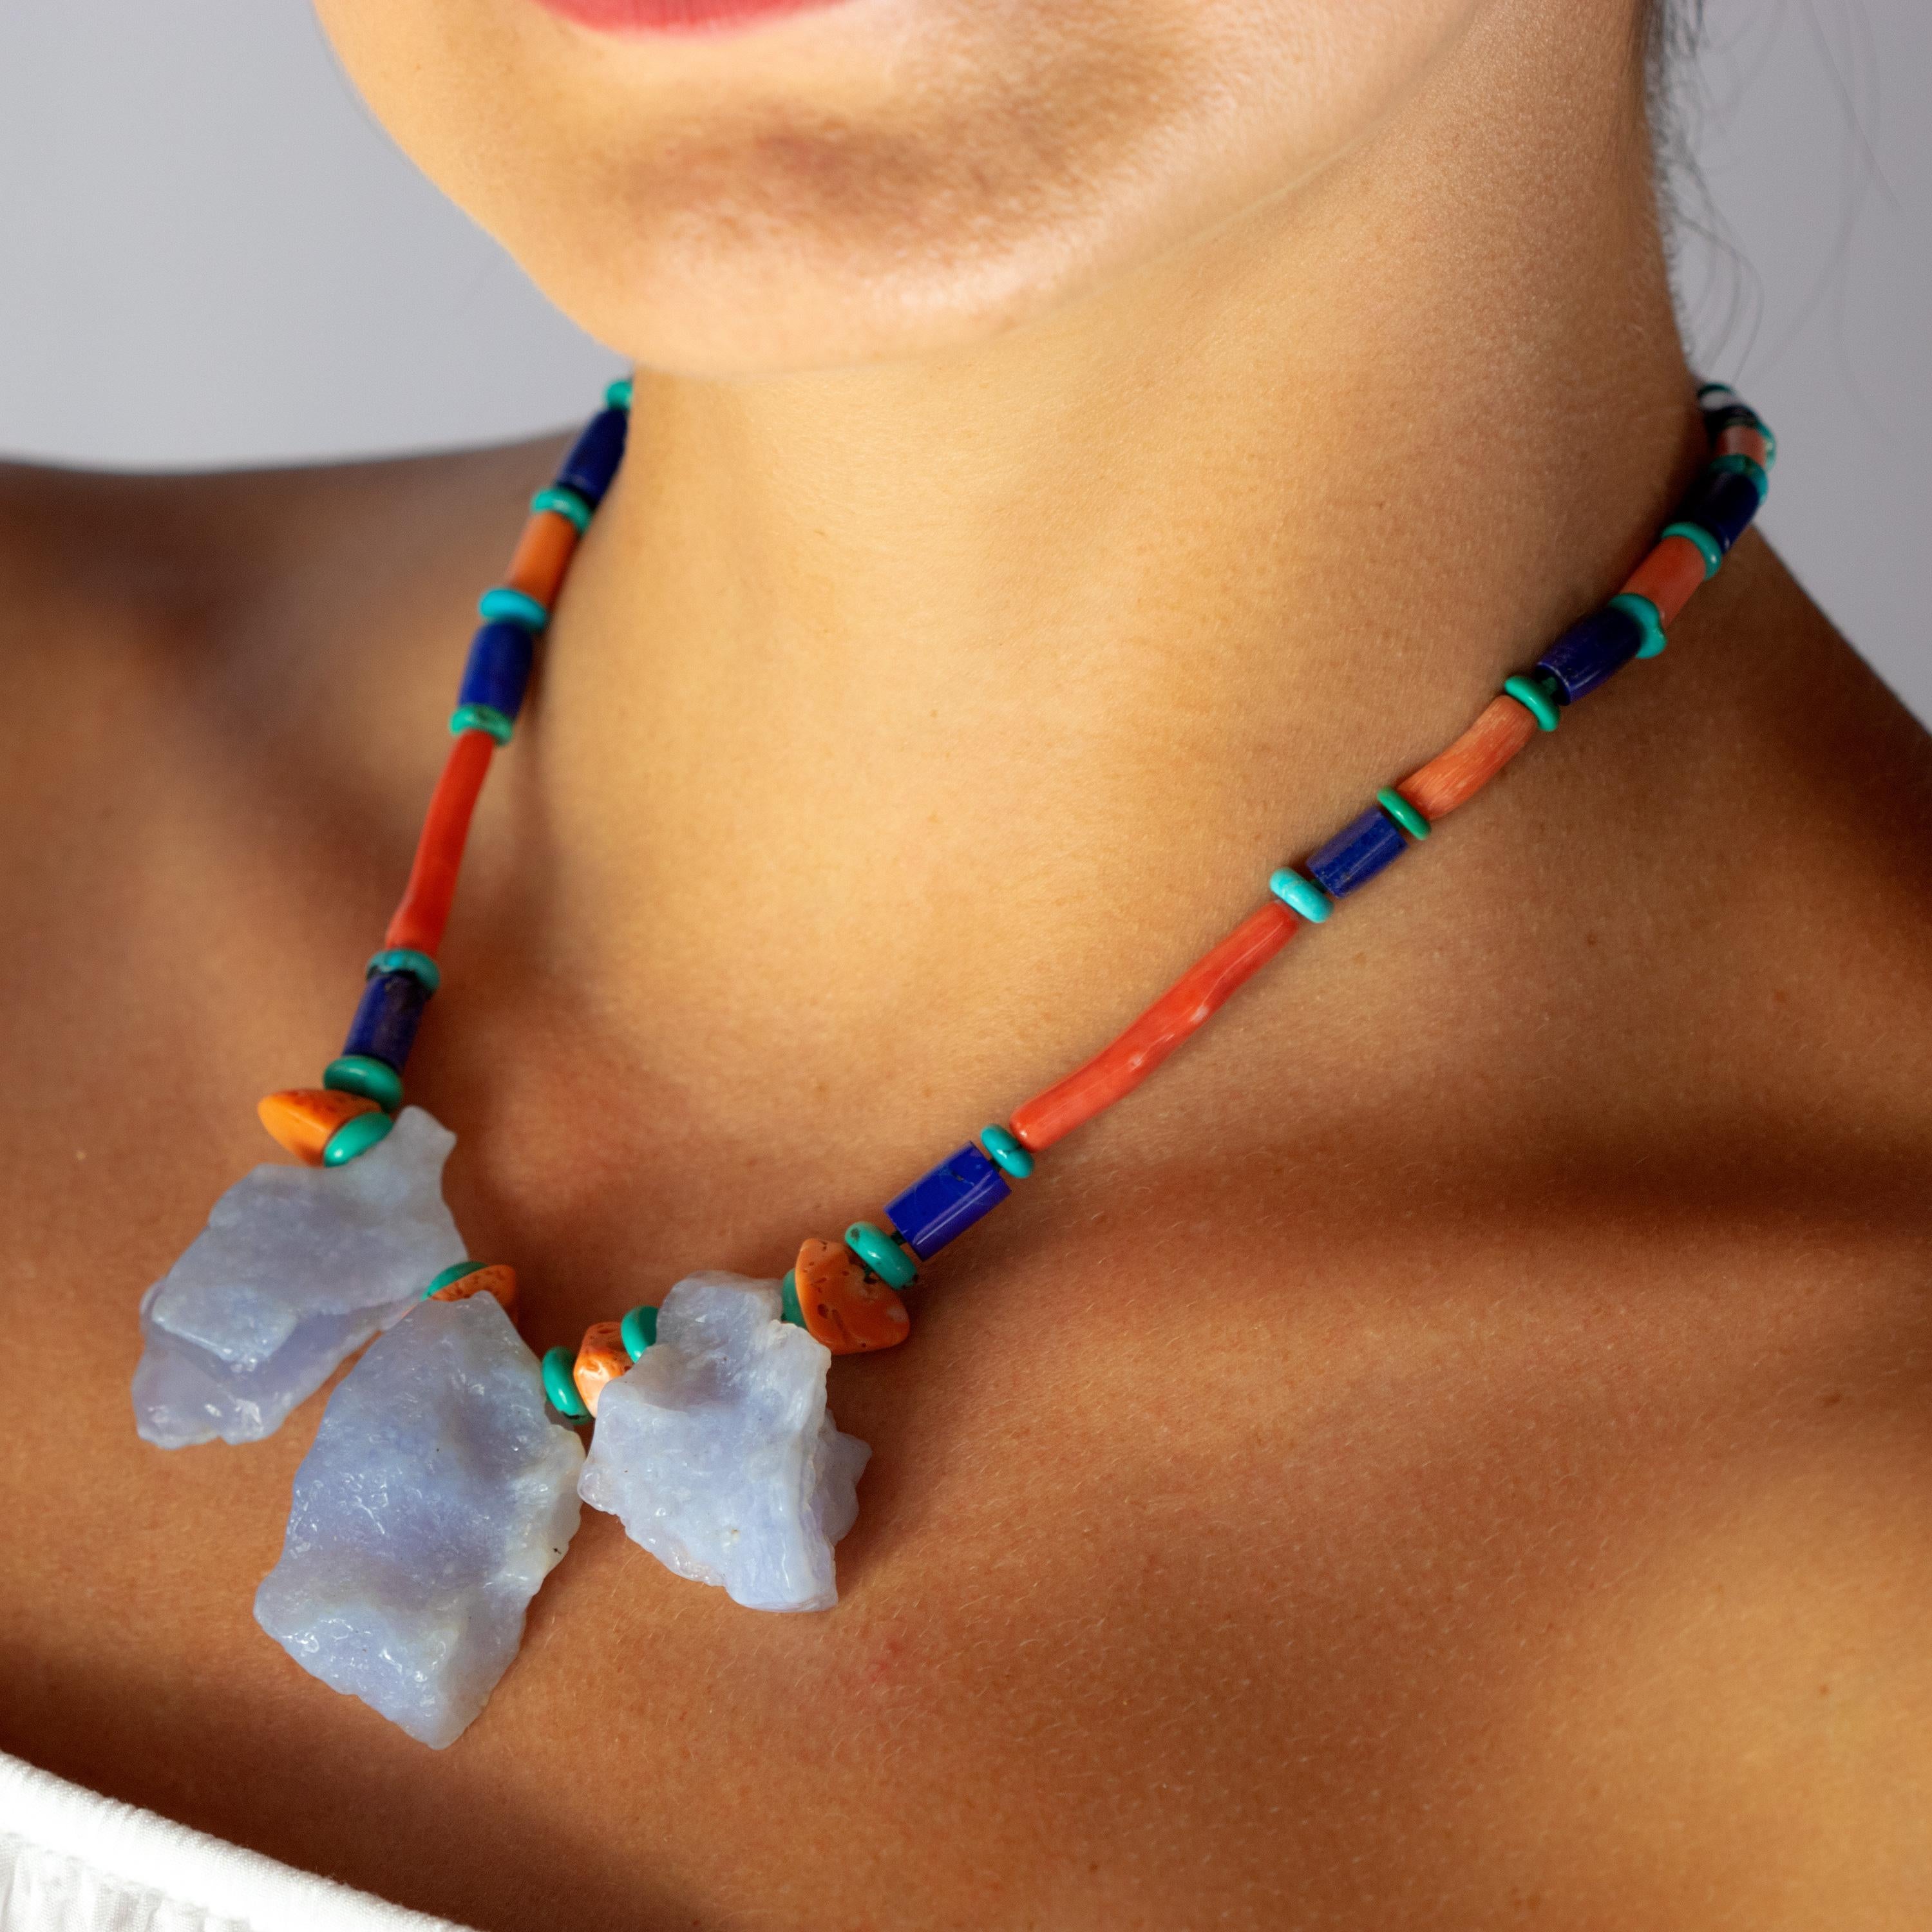 Breathtaking and sumptuous luminous necklace with Chalcedony Lapis Lazuli Turquoise and coral stones. Abstract jewellery 925 sterling silver piece inspired by the beauty of the diversity, asymmetry and color. Stunning masterpiece with a range of